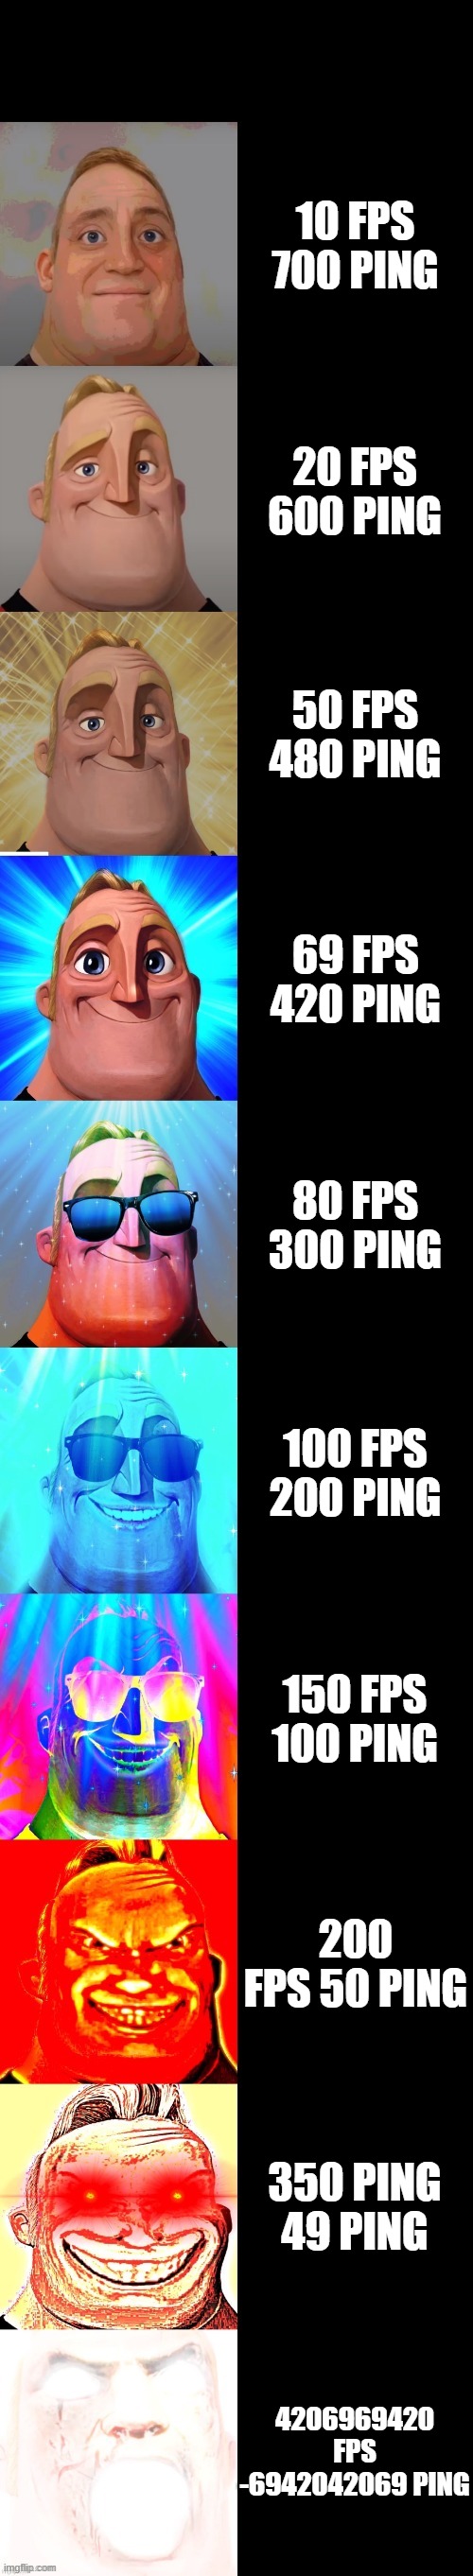 wow so the last one needs a super computer lol | 10 FPS 700 PING; 20 FPS 600 PING; 50 FPS 480 PING; 69 FPS 420 PING; 80 FPS 300 PING; 100 FPS 200 PING; 150 FPS 100 PING; 200 FPS 50 PING; 350 PING 49 PING; 4206969420 FPS -6942042069 PING | image tagged in mr incredible becoming canny | made w/ Imgflip meme maker